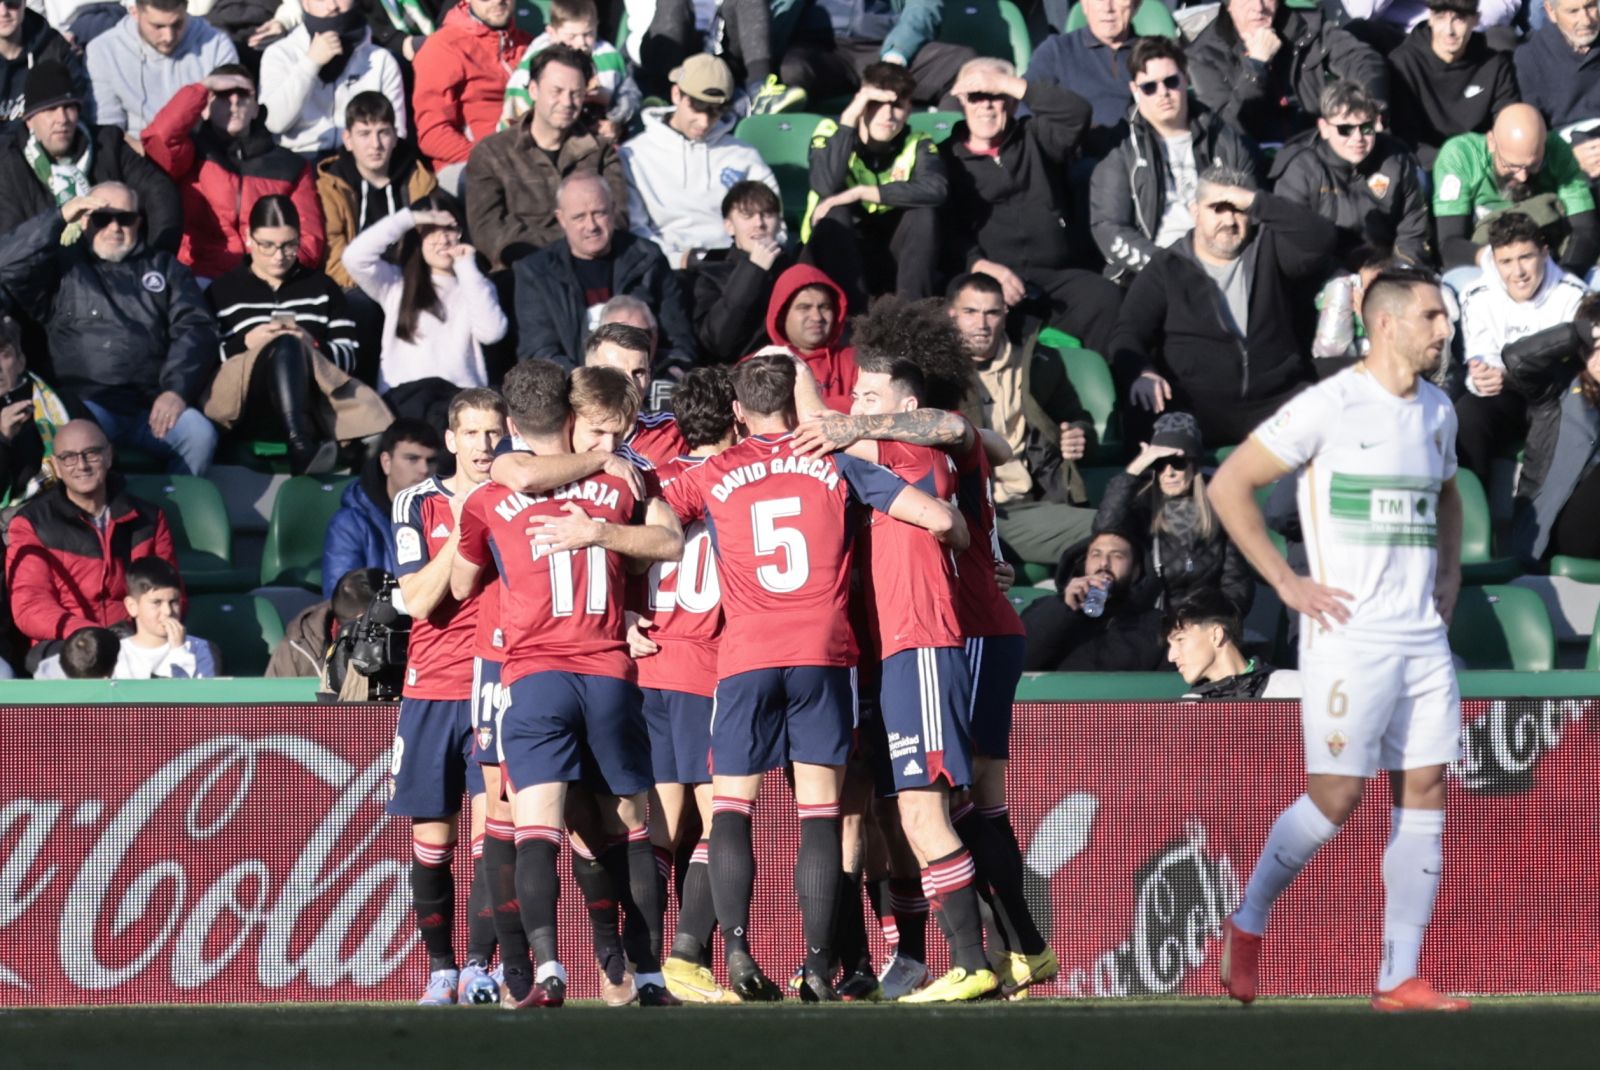 epa10423472 Osasuna's players celebrate their first goal against Elche, scored by Chimy Avila, during their LaLiga soccer match played at Manuel Martinez Valero stadium in Elche, eastern Spain, 22 January 2023.  EPA/Ana Escobar